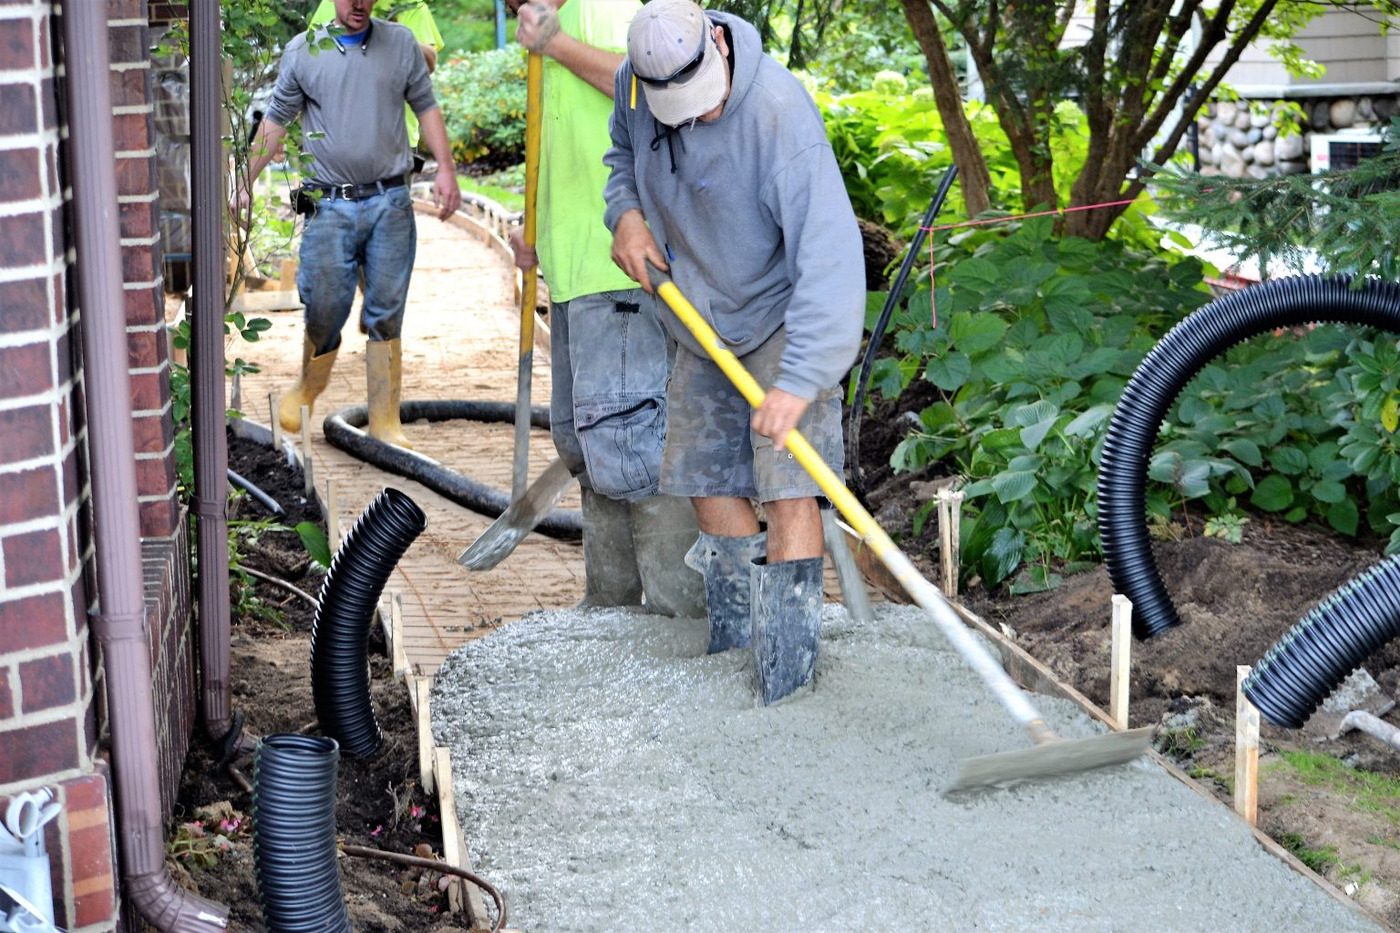 SF Bay Area Concrete Contractors specializes in a wide range of concrete services for residential and commercial clients in the San Francisco Bay Area.